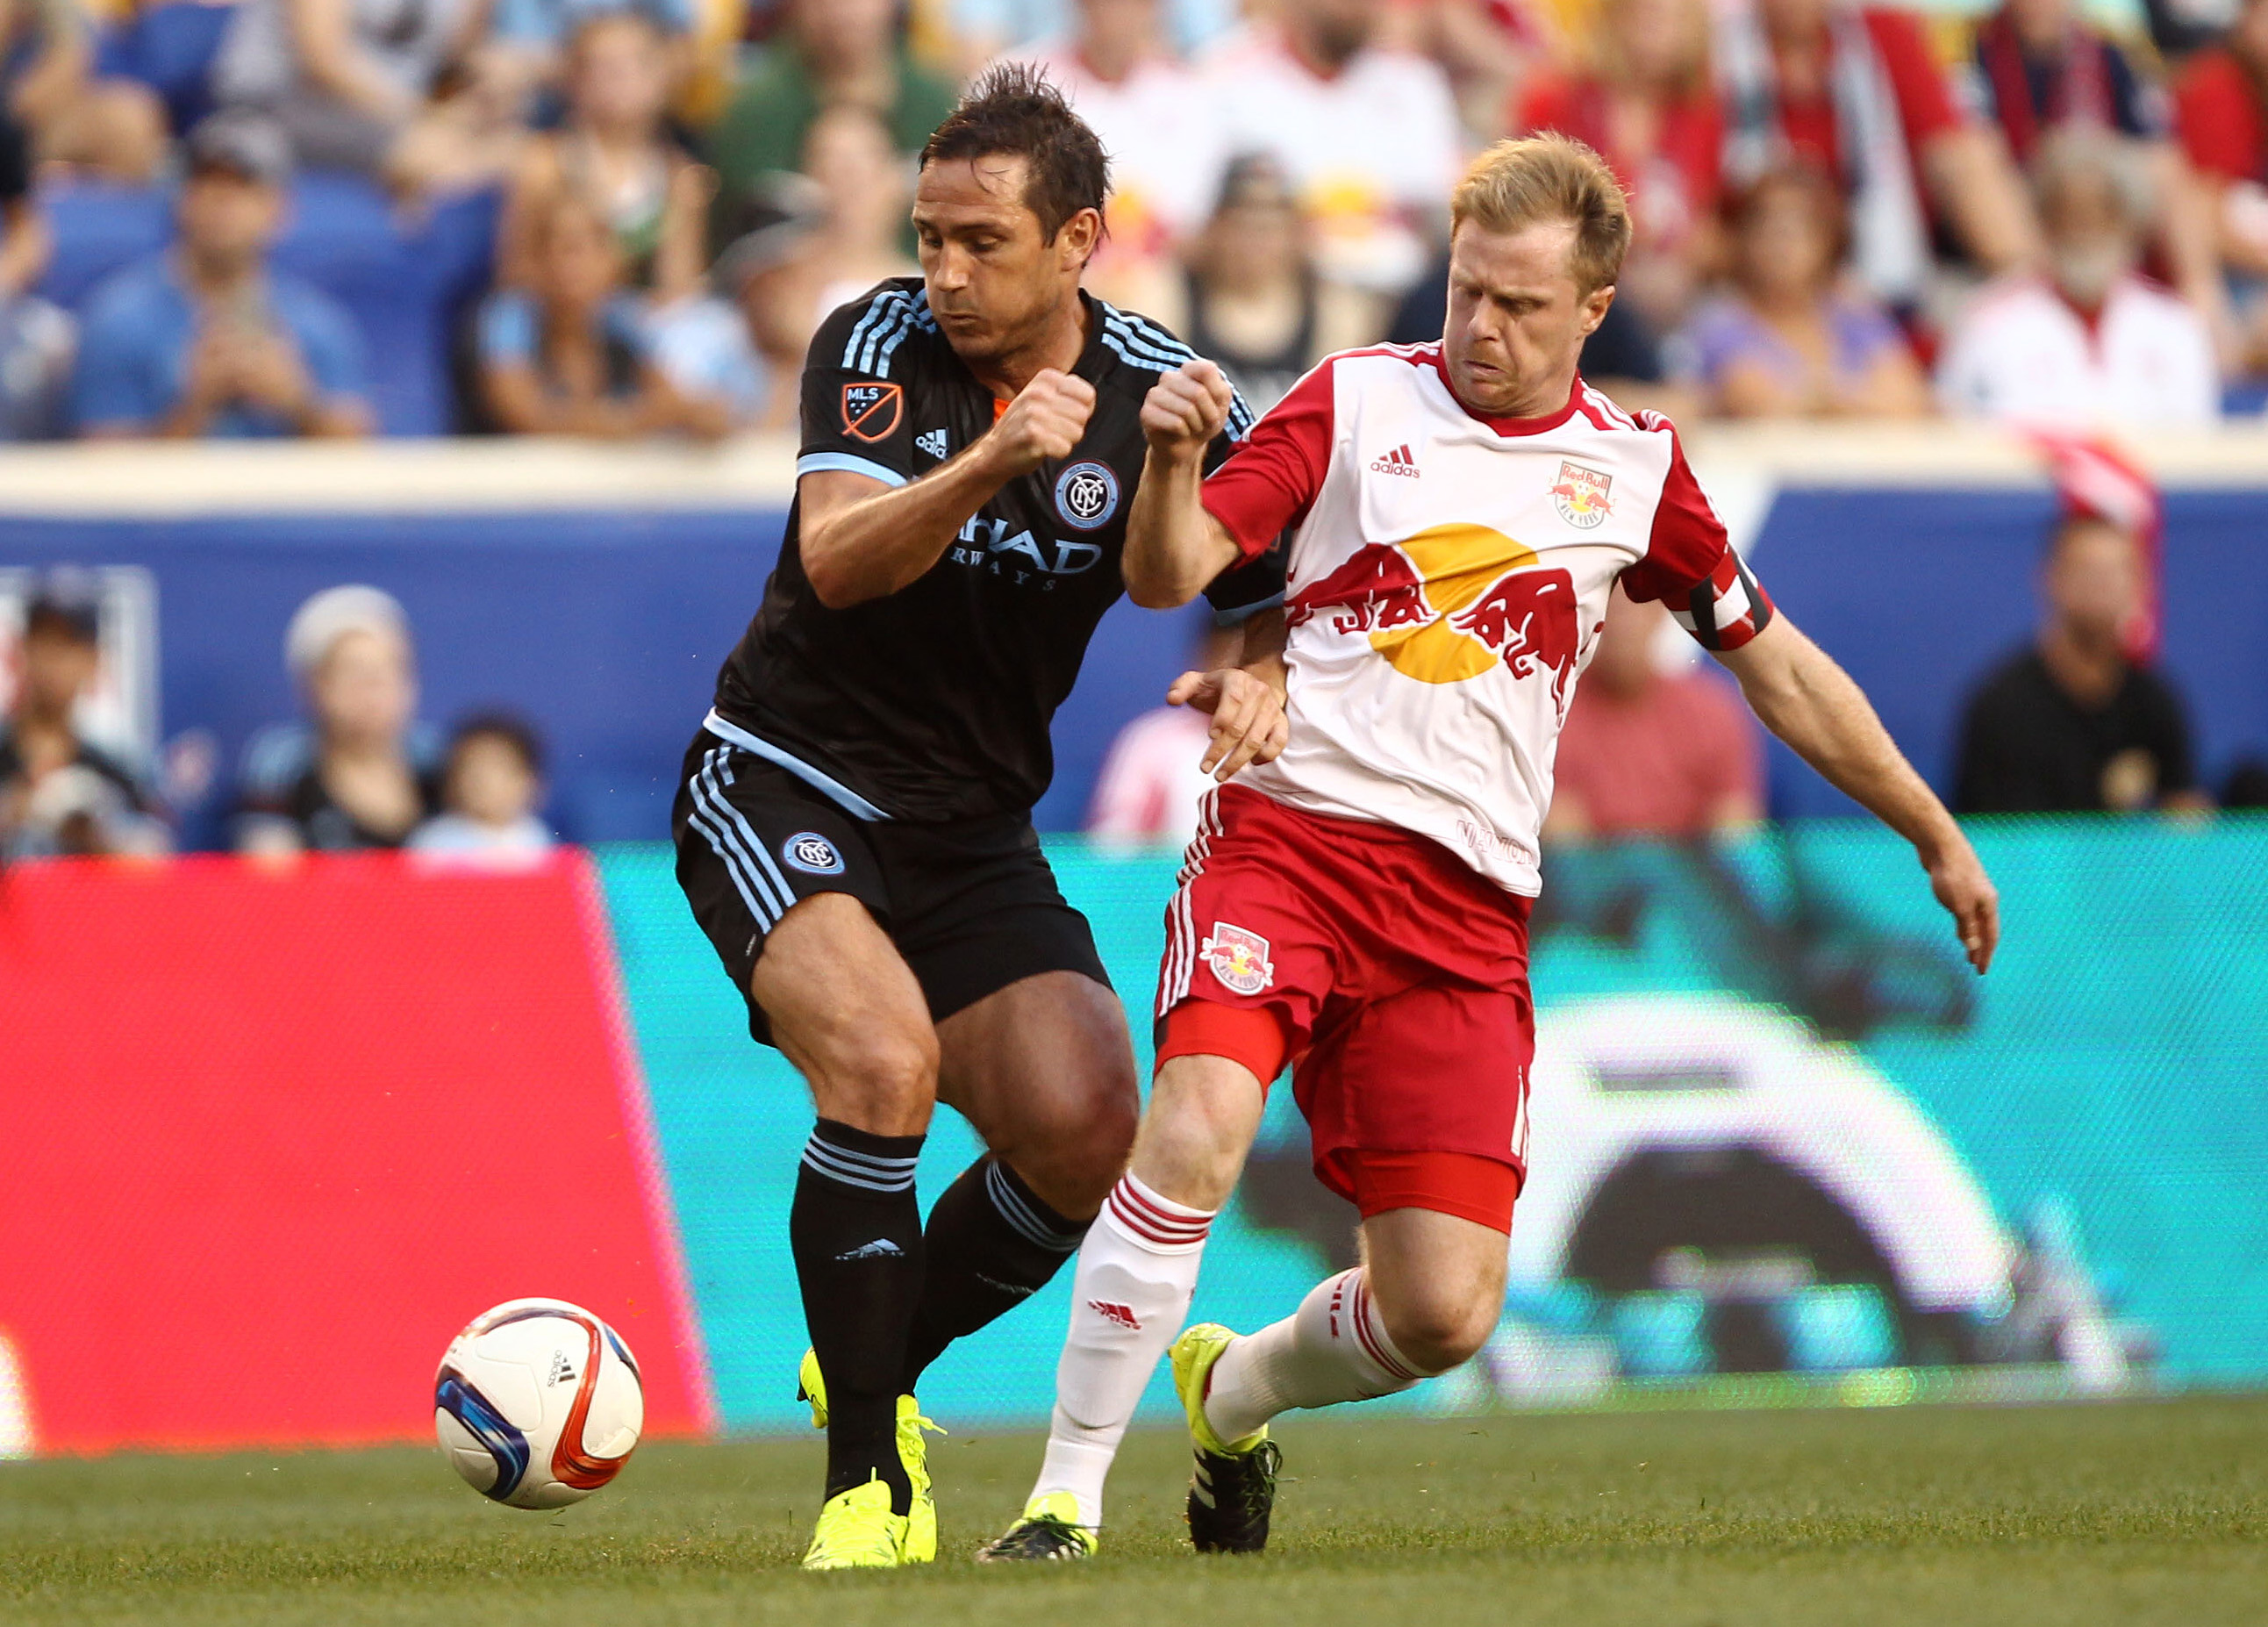 Aug 9, 2015; Harrison, NJ, USA; New York City FC midfielder Frank Lampard (8) and New York Red Bulls midfielder Dax McCarty (11) battle for a ball during the first half at Red Bull Arena. Mandatory Credit: Danny Wild-USA TODAY Sports